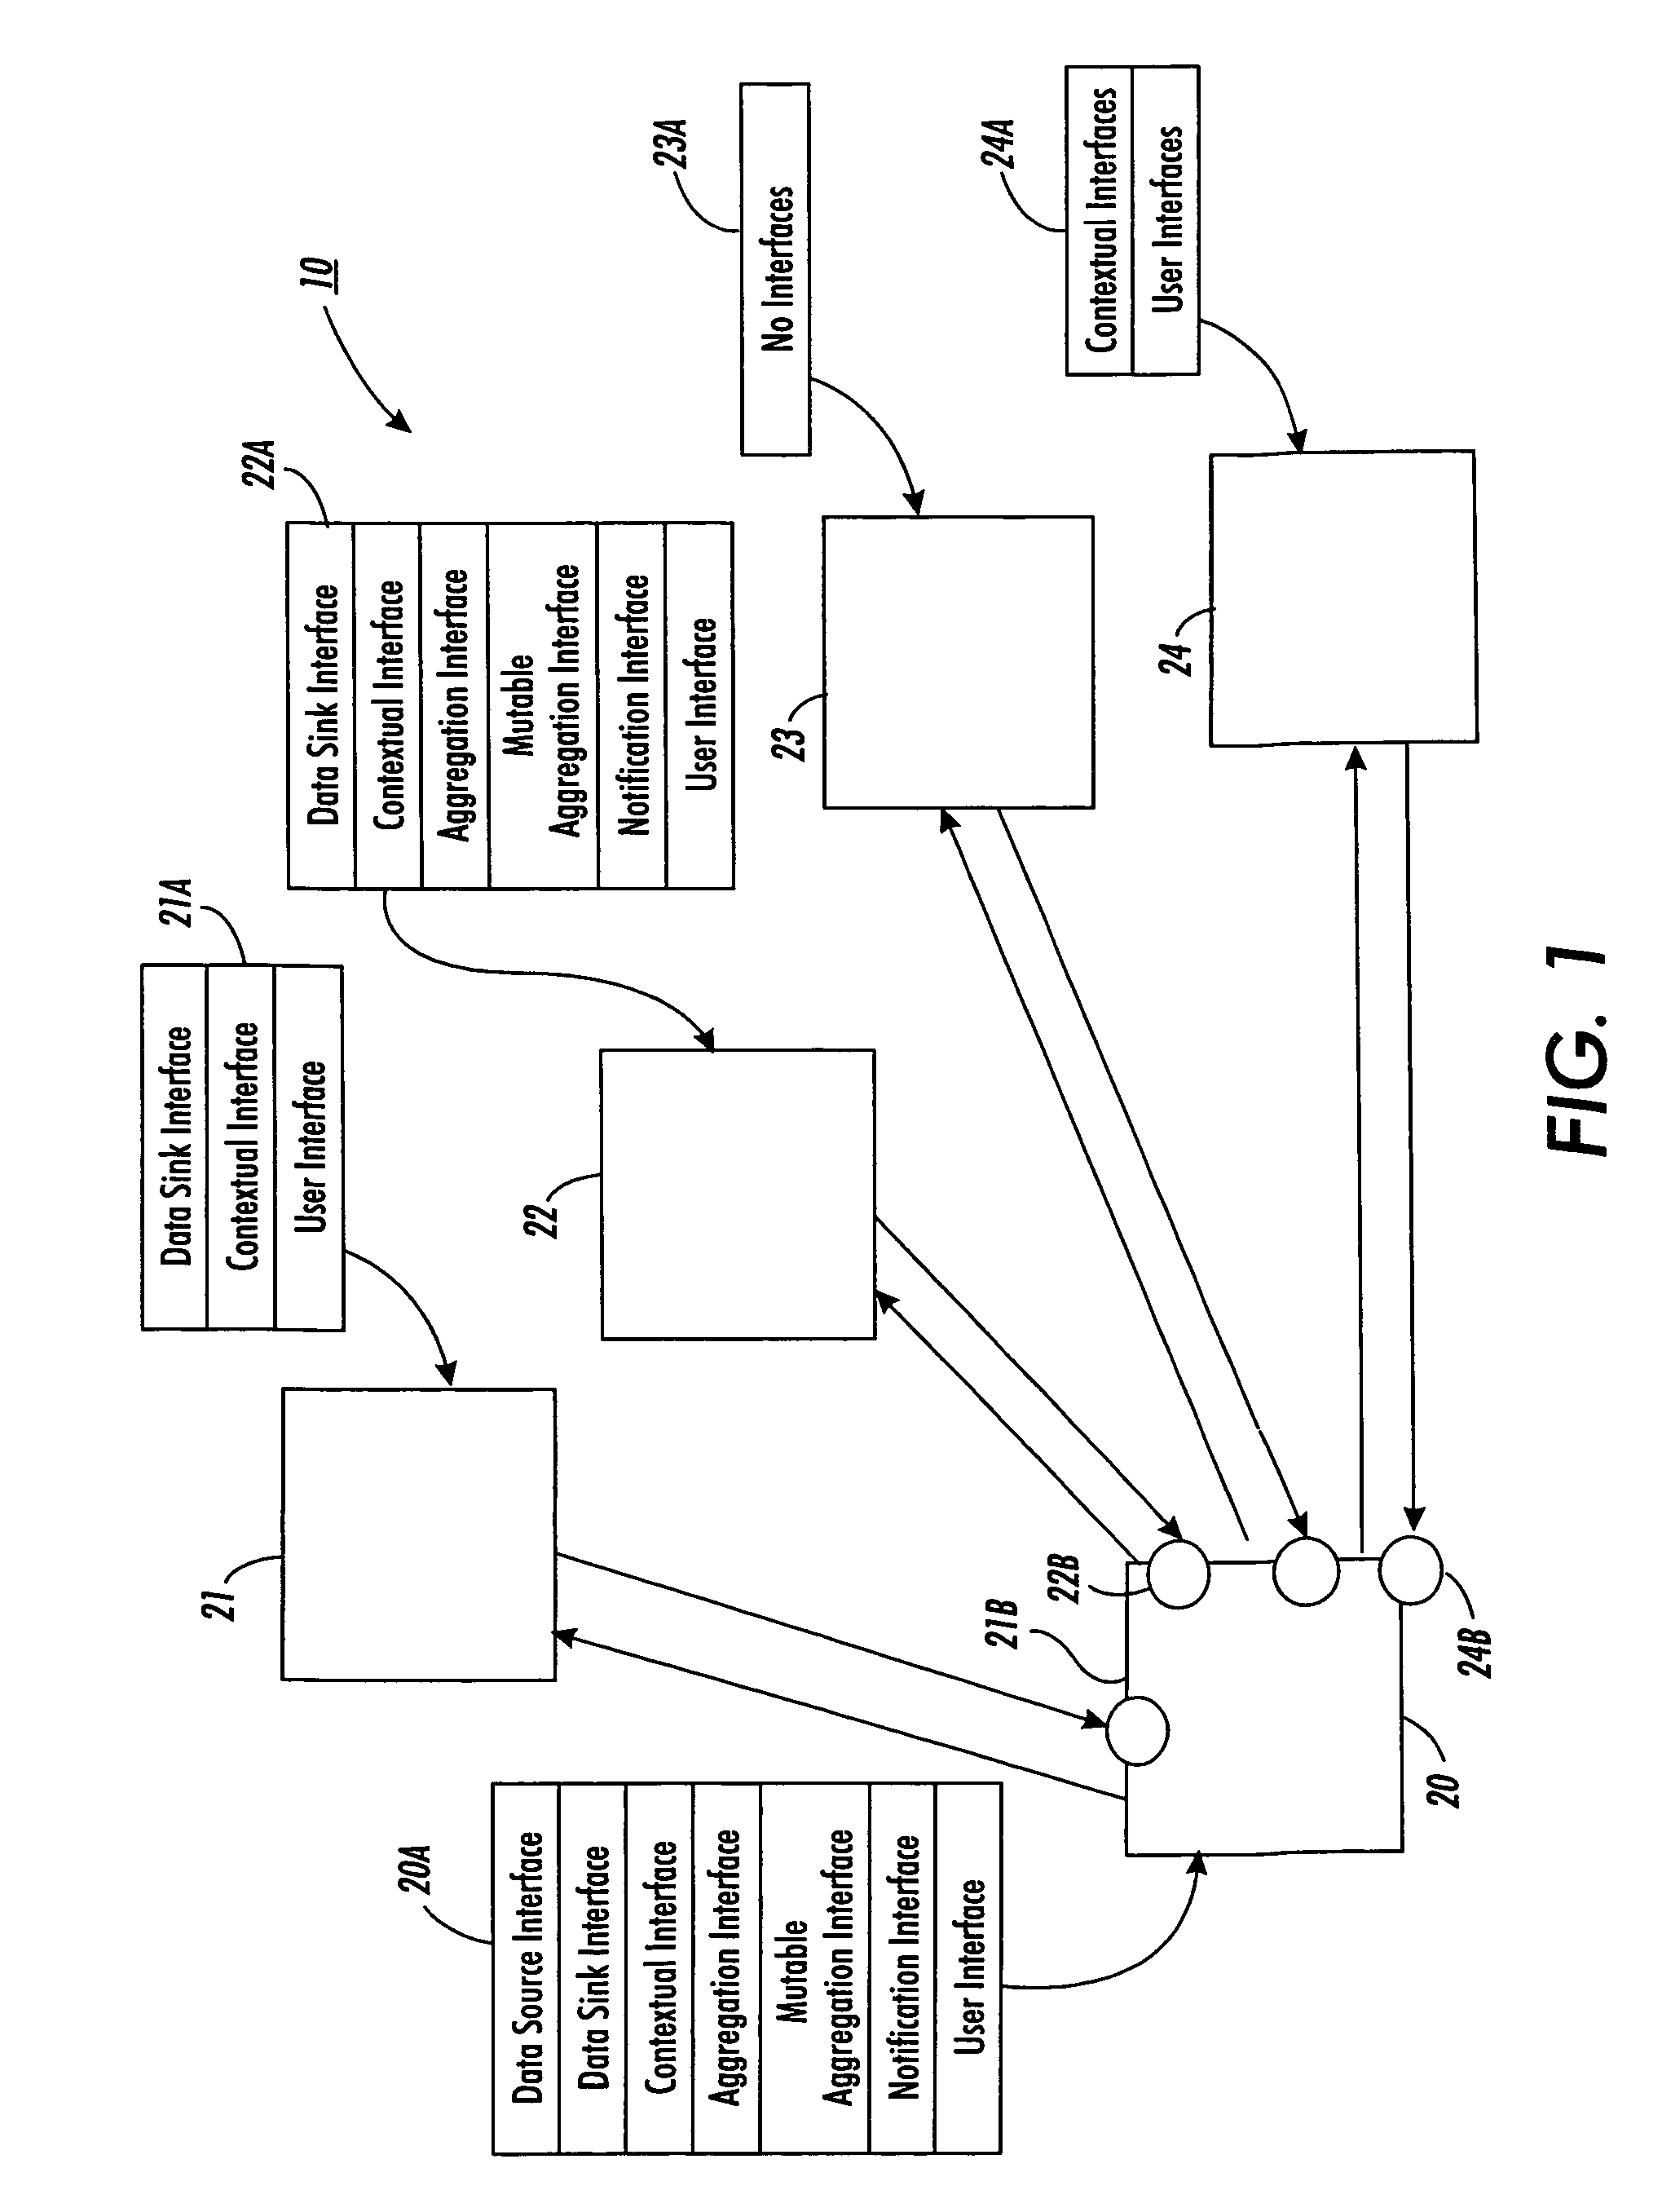 System and method for enabling communication among arbitrary components